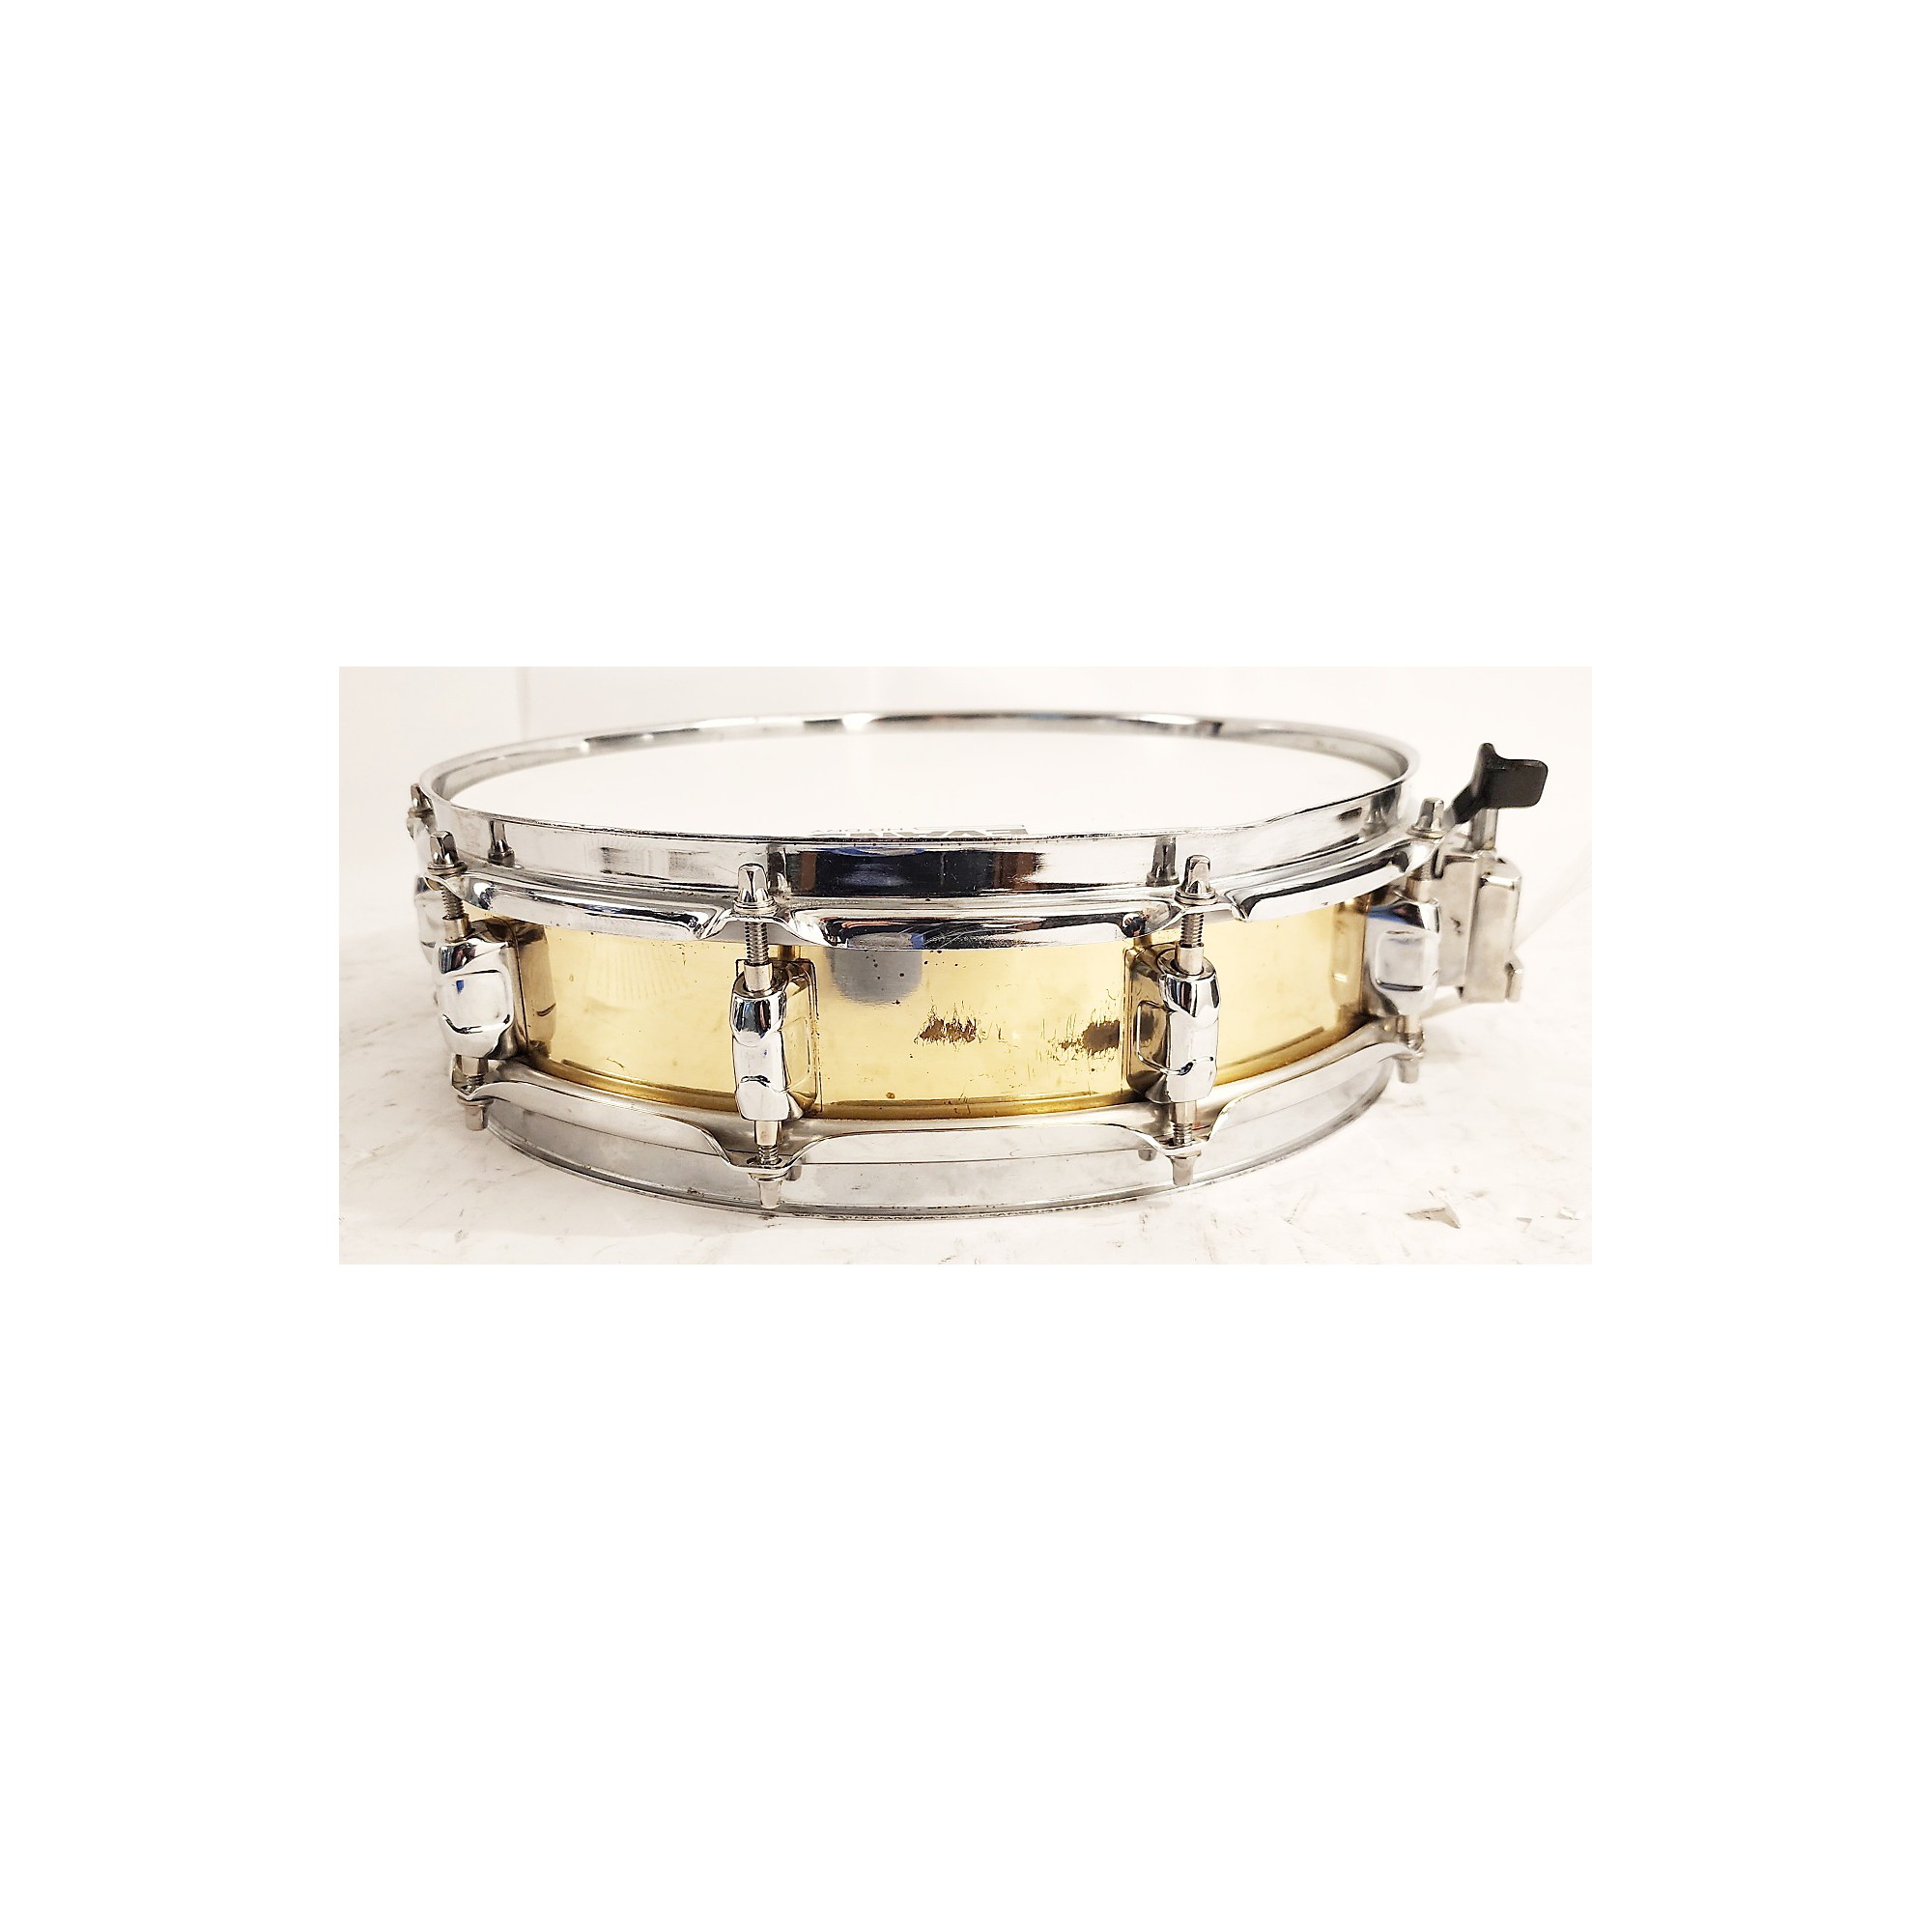 Used Miscellaneous 3X14 Power Piccolo Snare Drum brass 82